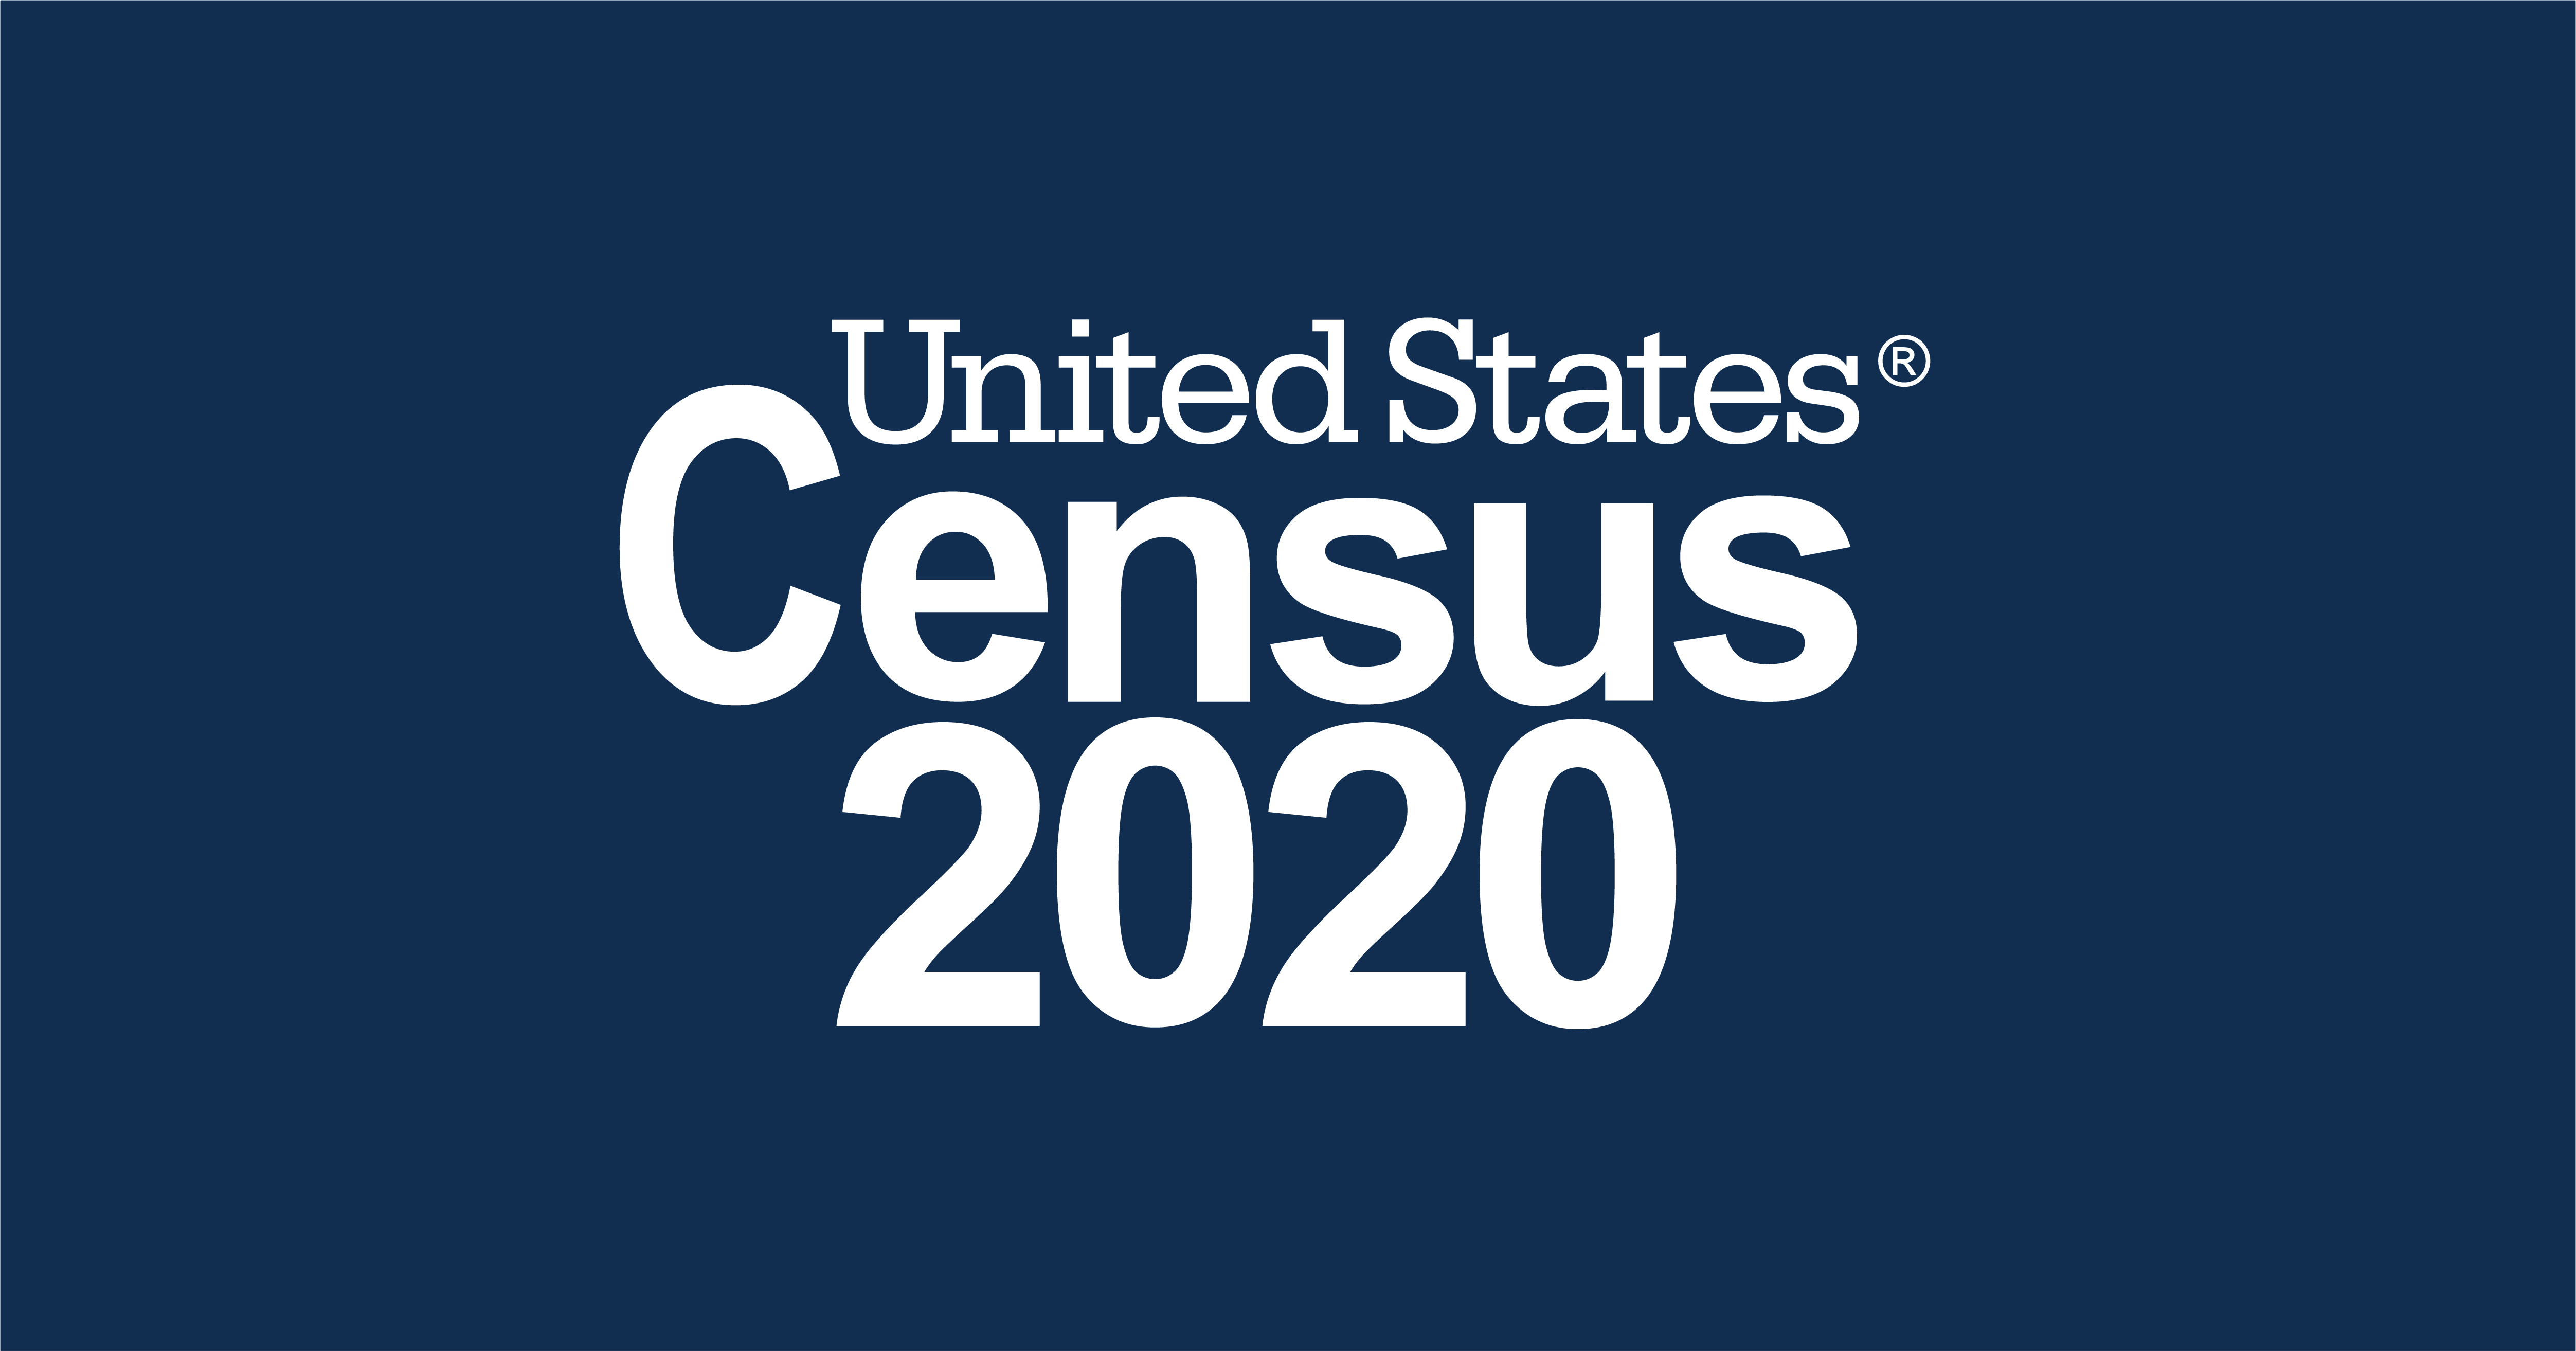 The 2020 Census is the buzz. What does it mean, why is it so important? by Sulphur Springs Public Library Director Hope Cain